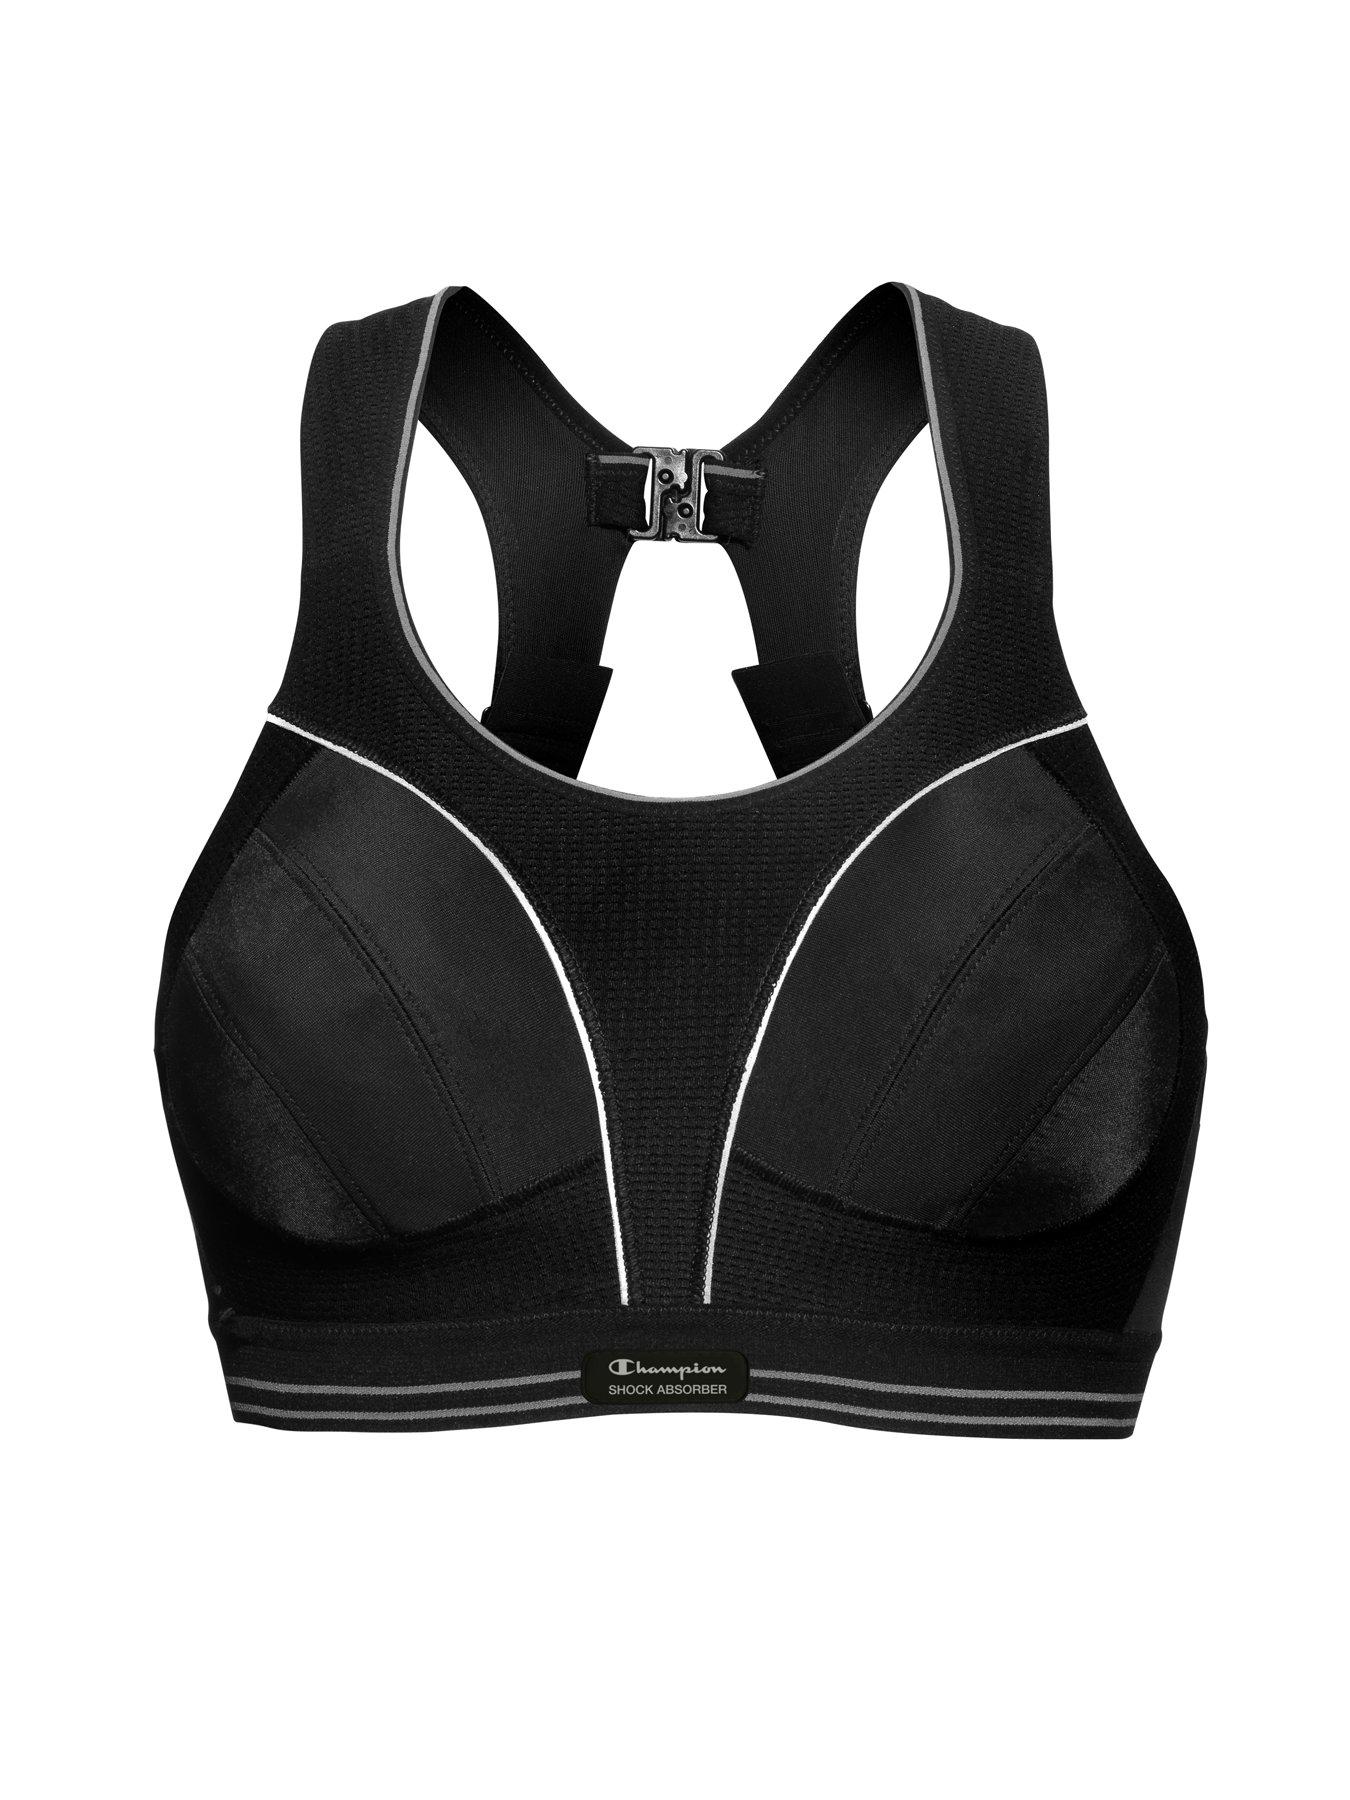 Shock Absorber Ultimate Run extreme high support sports bra in black